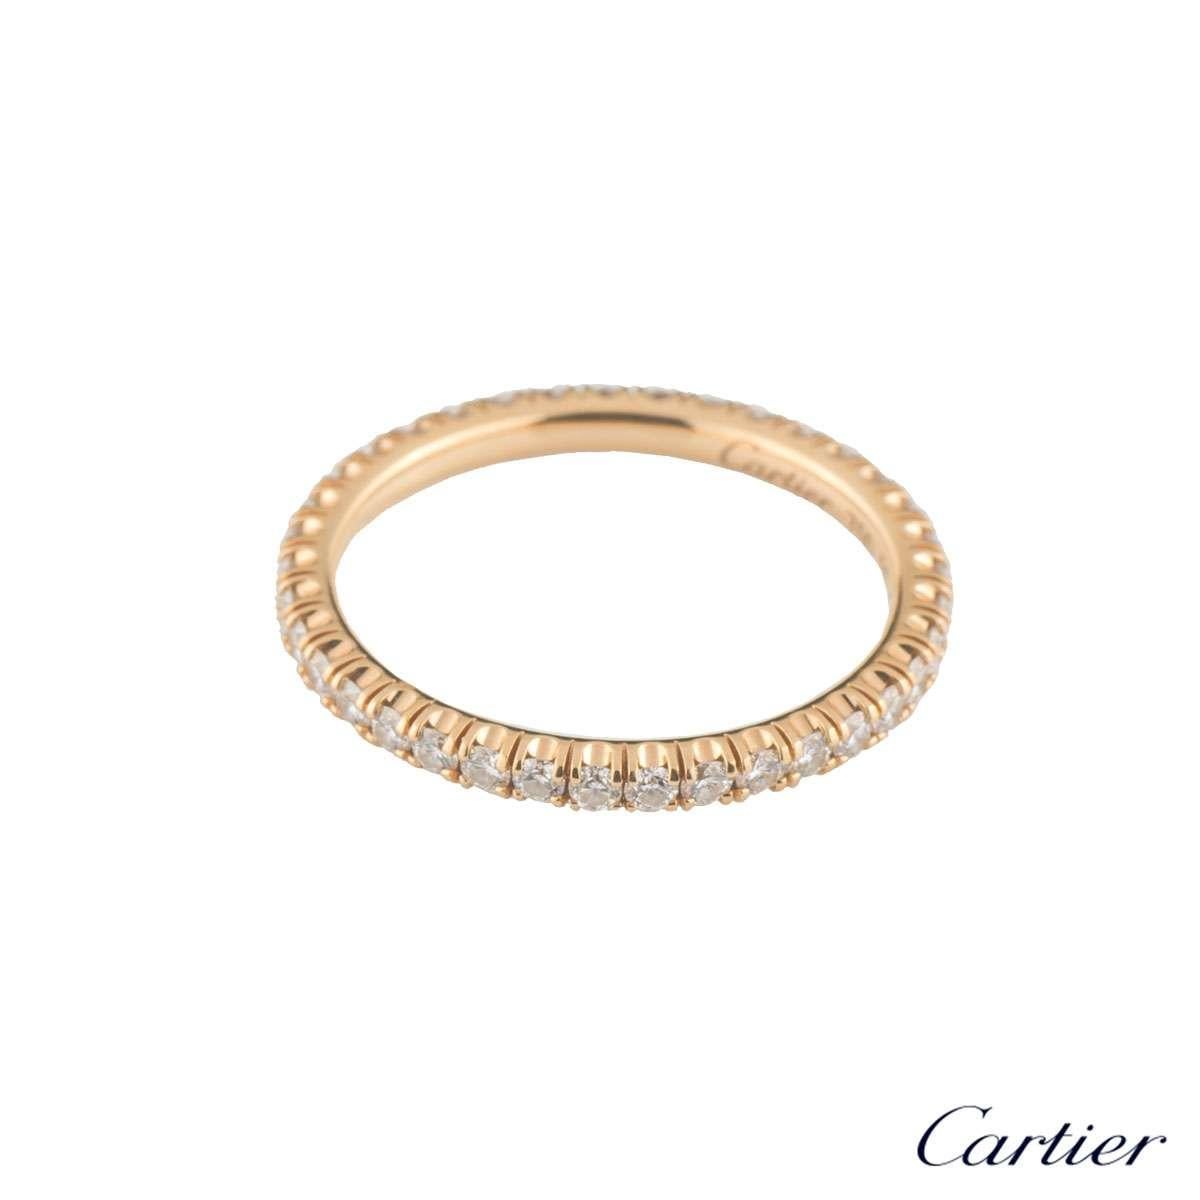 A beautiful 18k rose gold Cartier diamond ring from the Etincelle collection. The ring comprises of a full eternity of 37 round brilliant cut diamonds in a shared 4 claw setting all the way round. The diamonds have a total weight of 0.47ct, G+